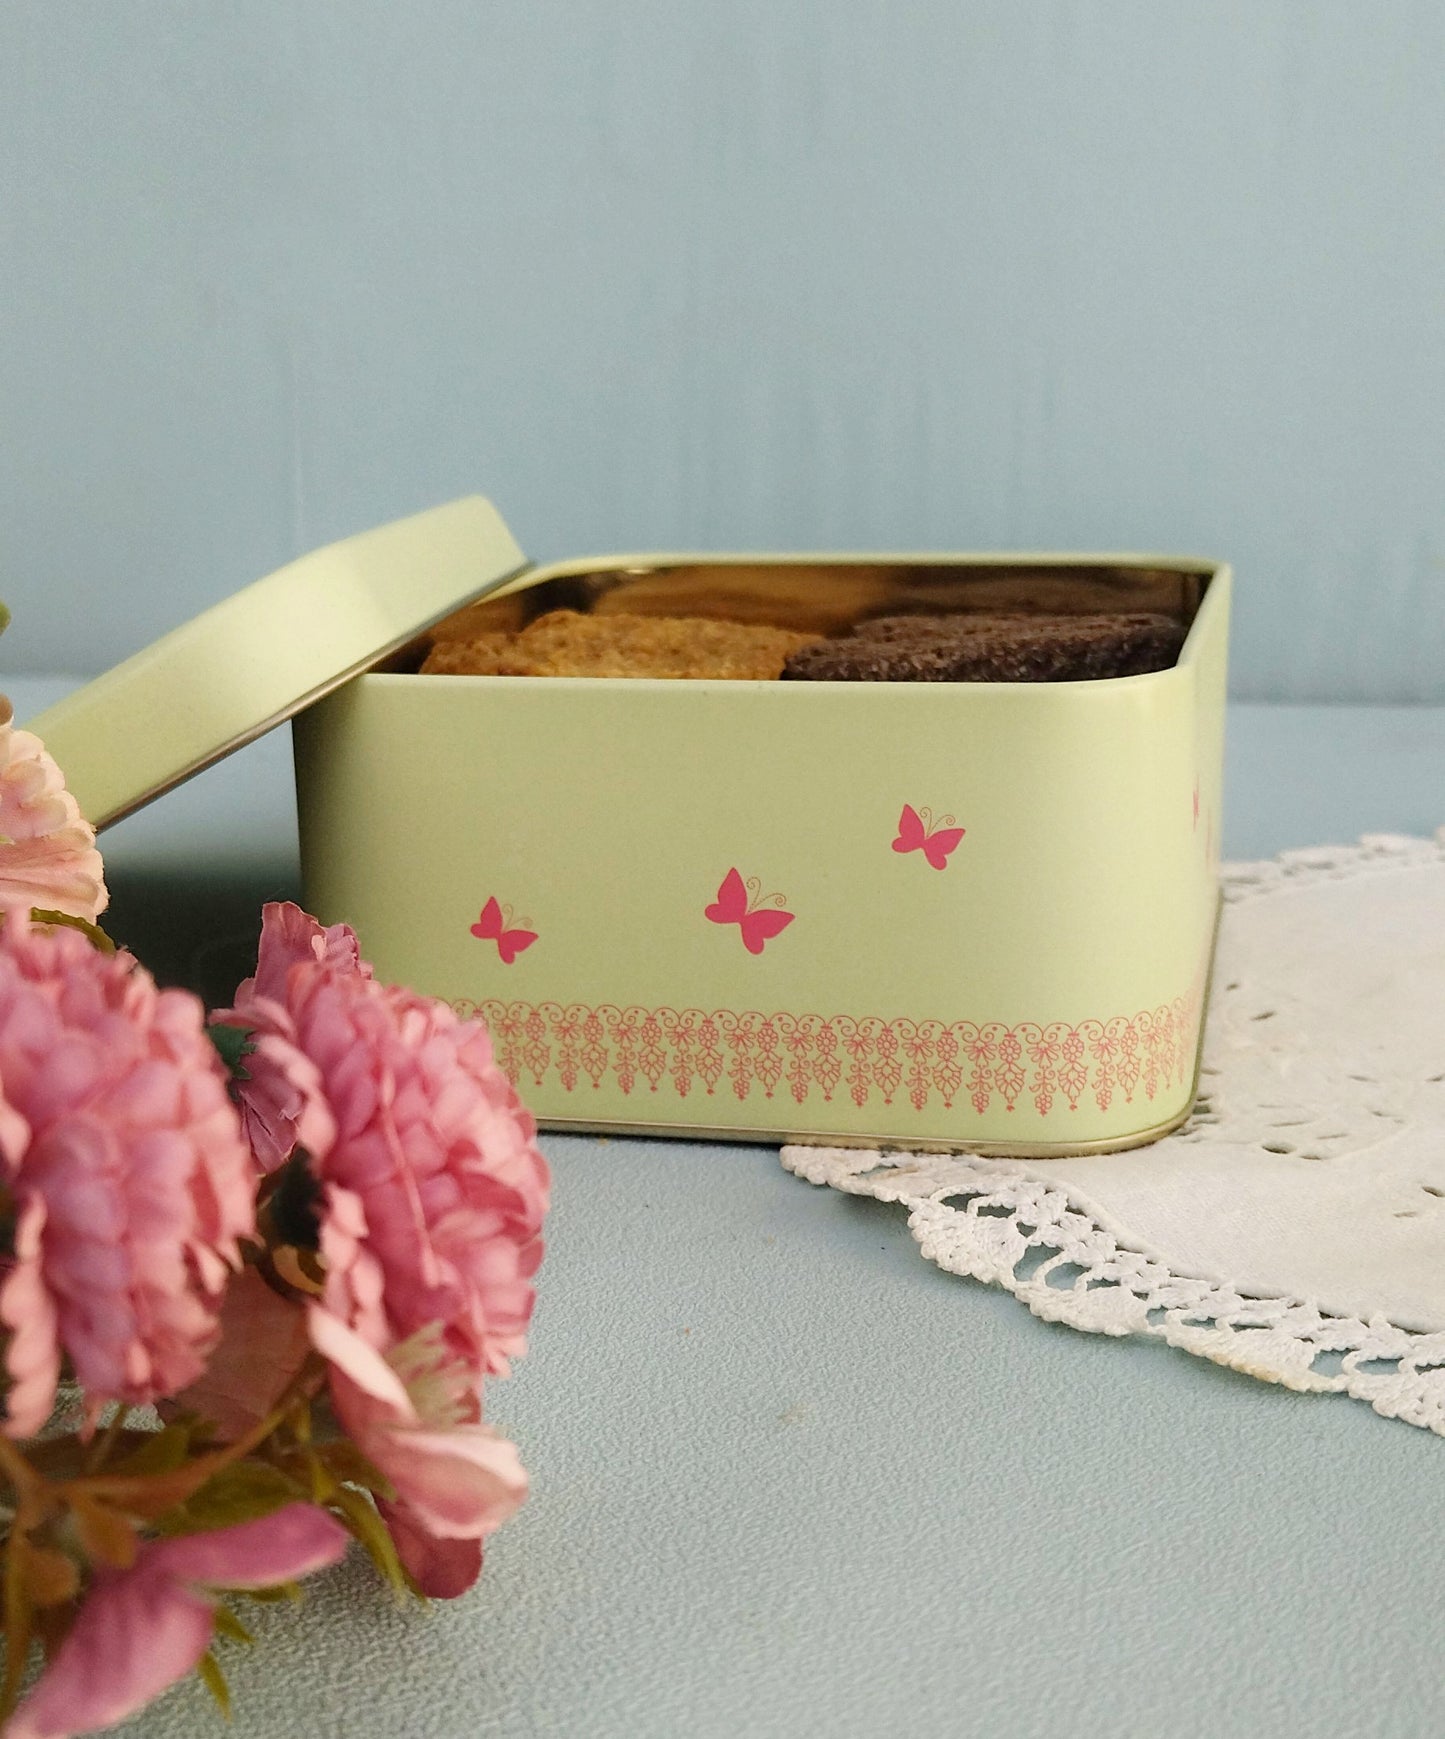 Cookies And Snacks Tin Box, Cute Metal Storage Box For Small Treasures